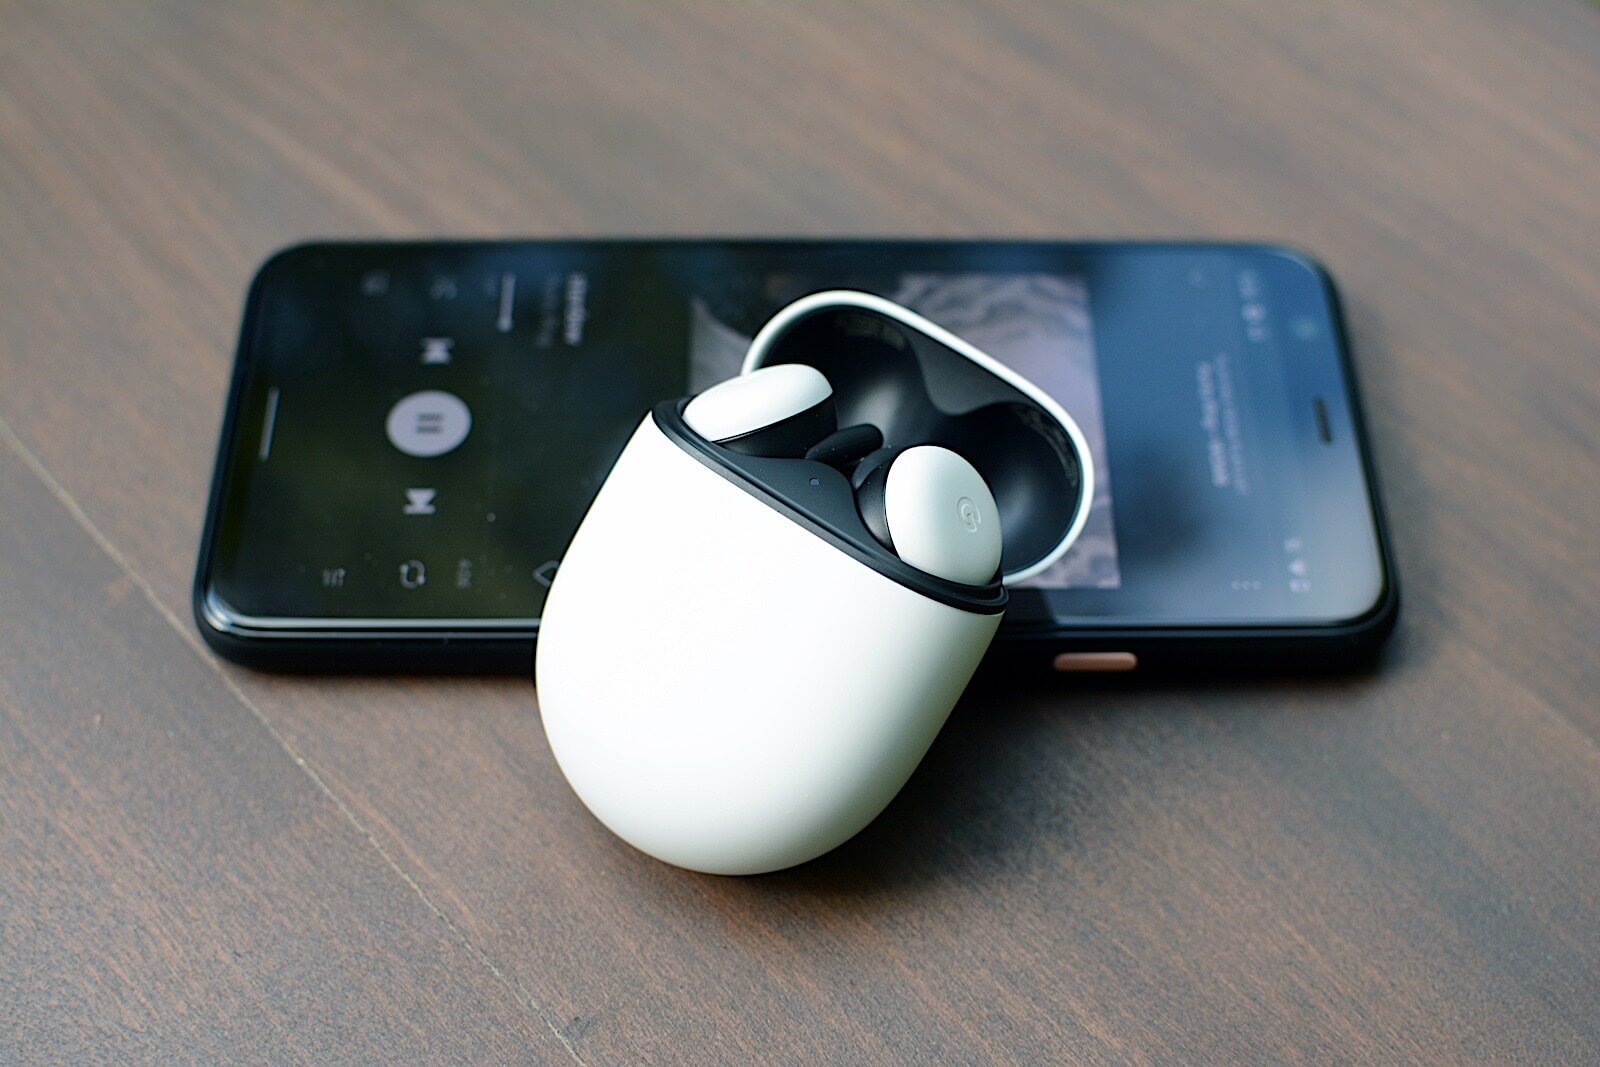 Google adds AirPods-like features to Bluetooth on Android